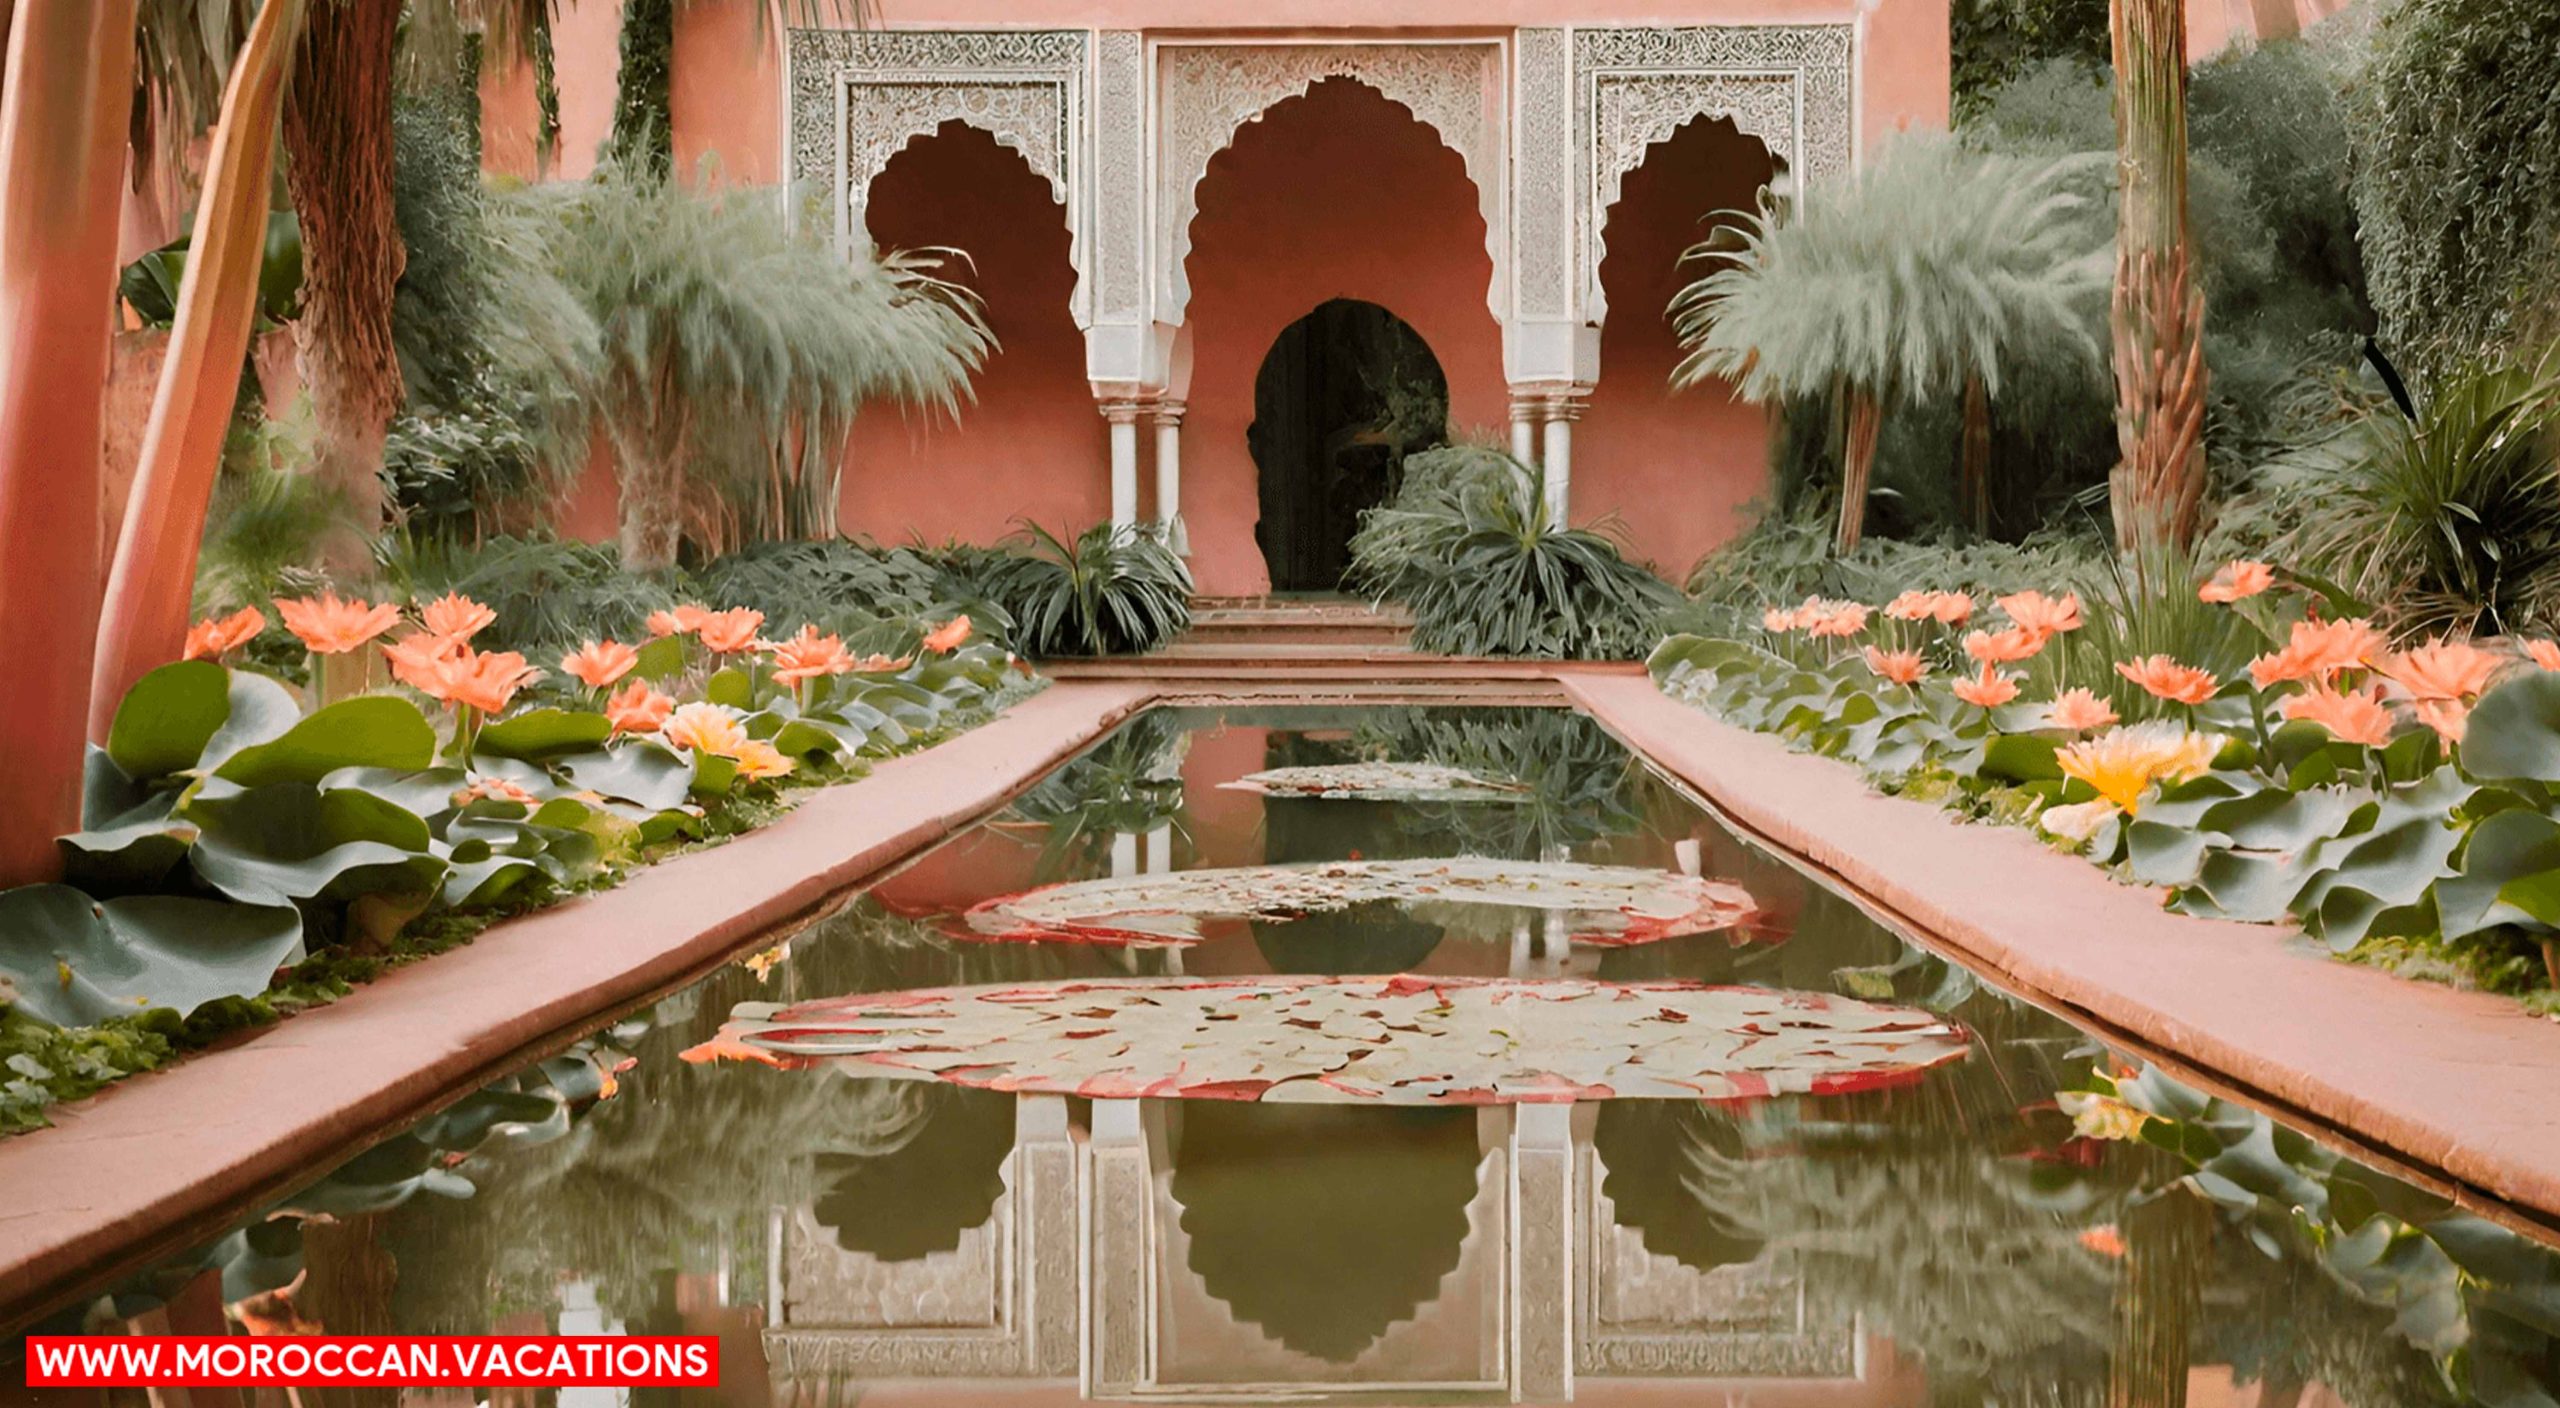 An enchanting reflection pool adorned with vibrant lily pads and surrounded by lush greenery.